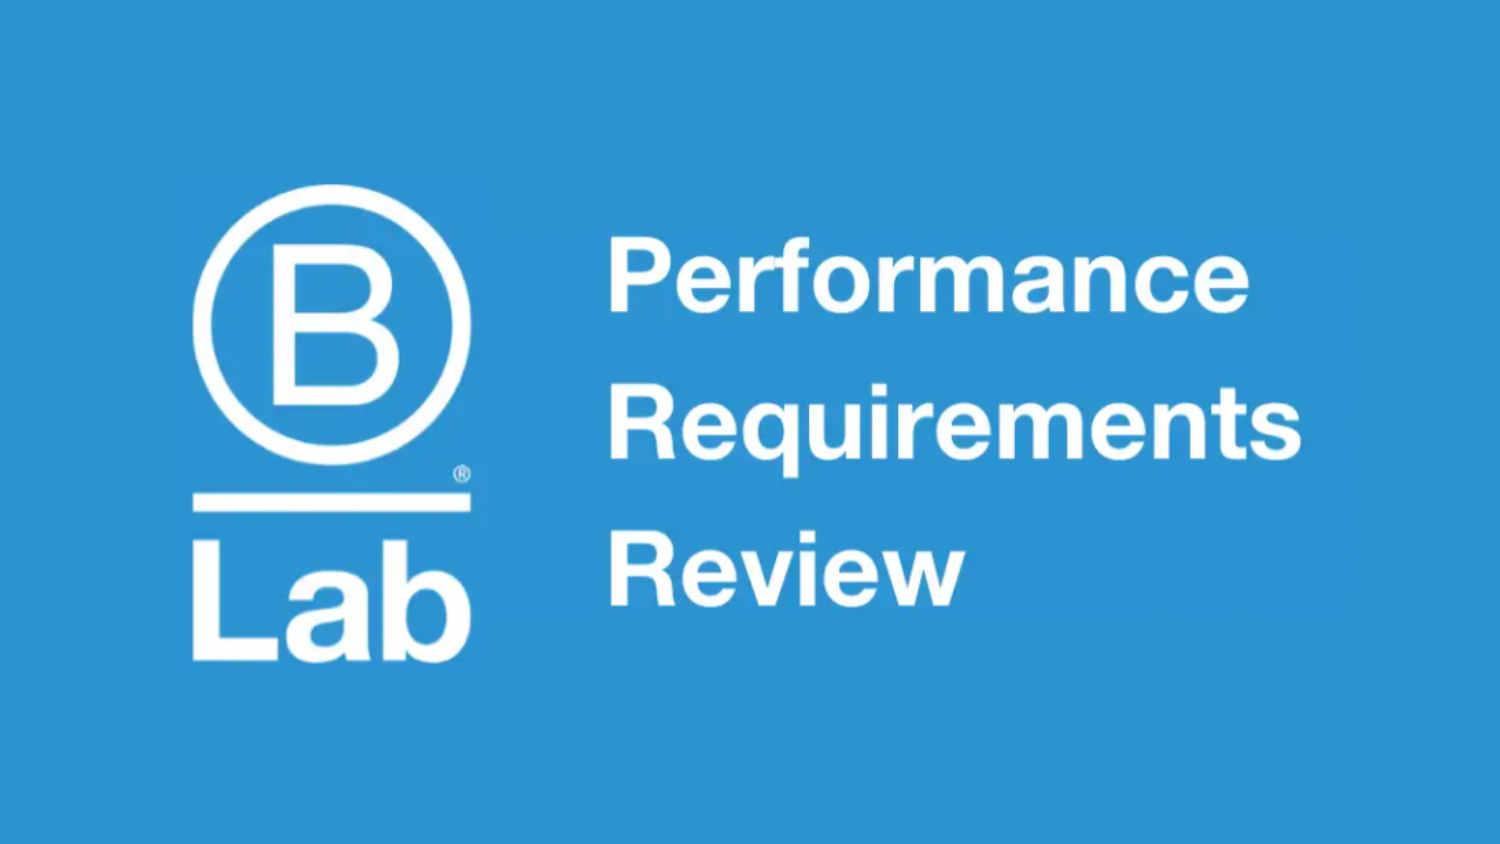 B Lab Performance Standards Review